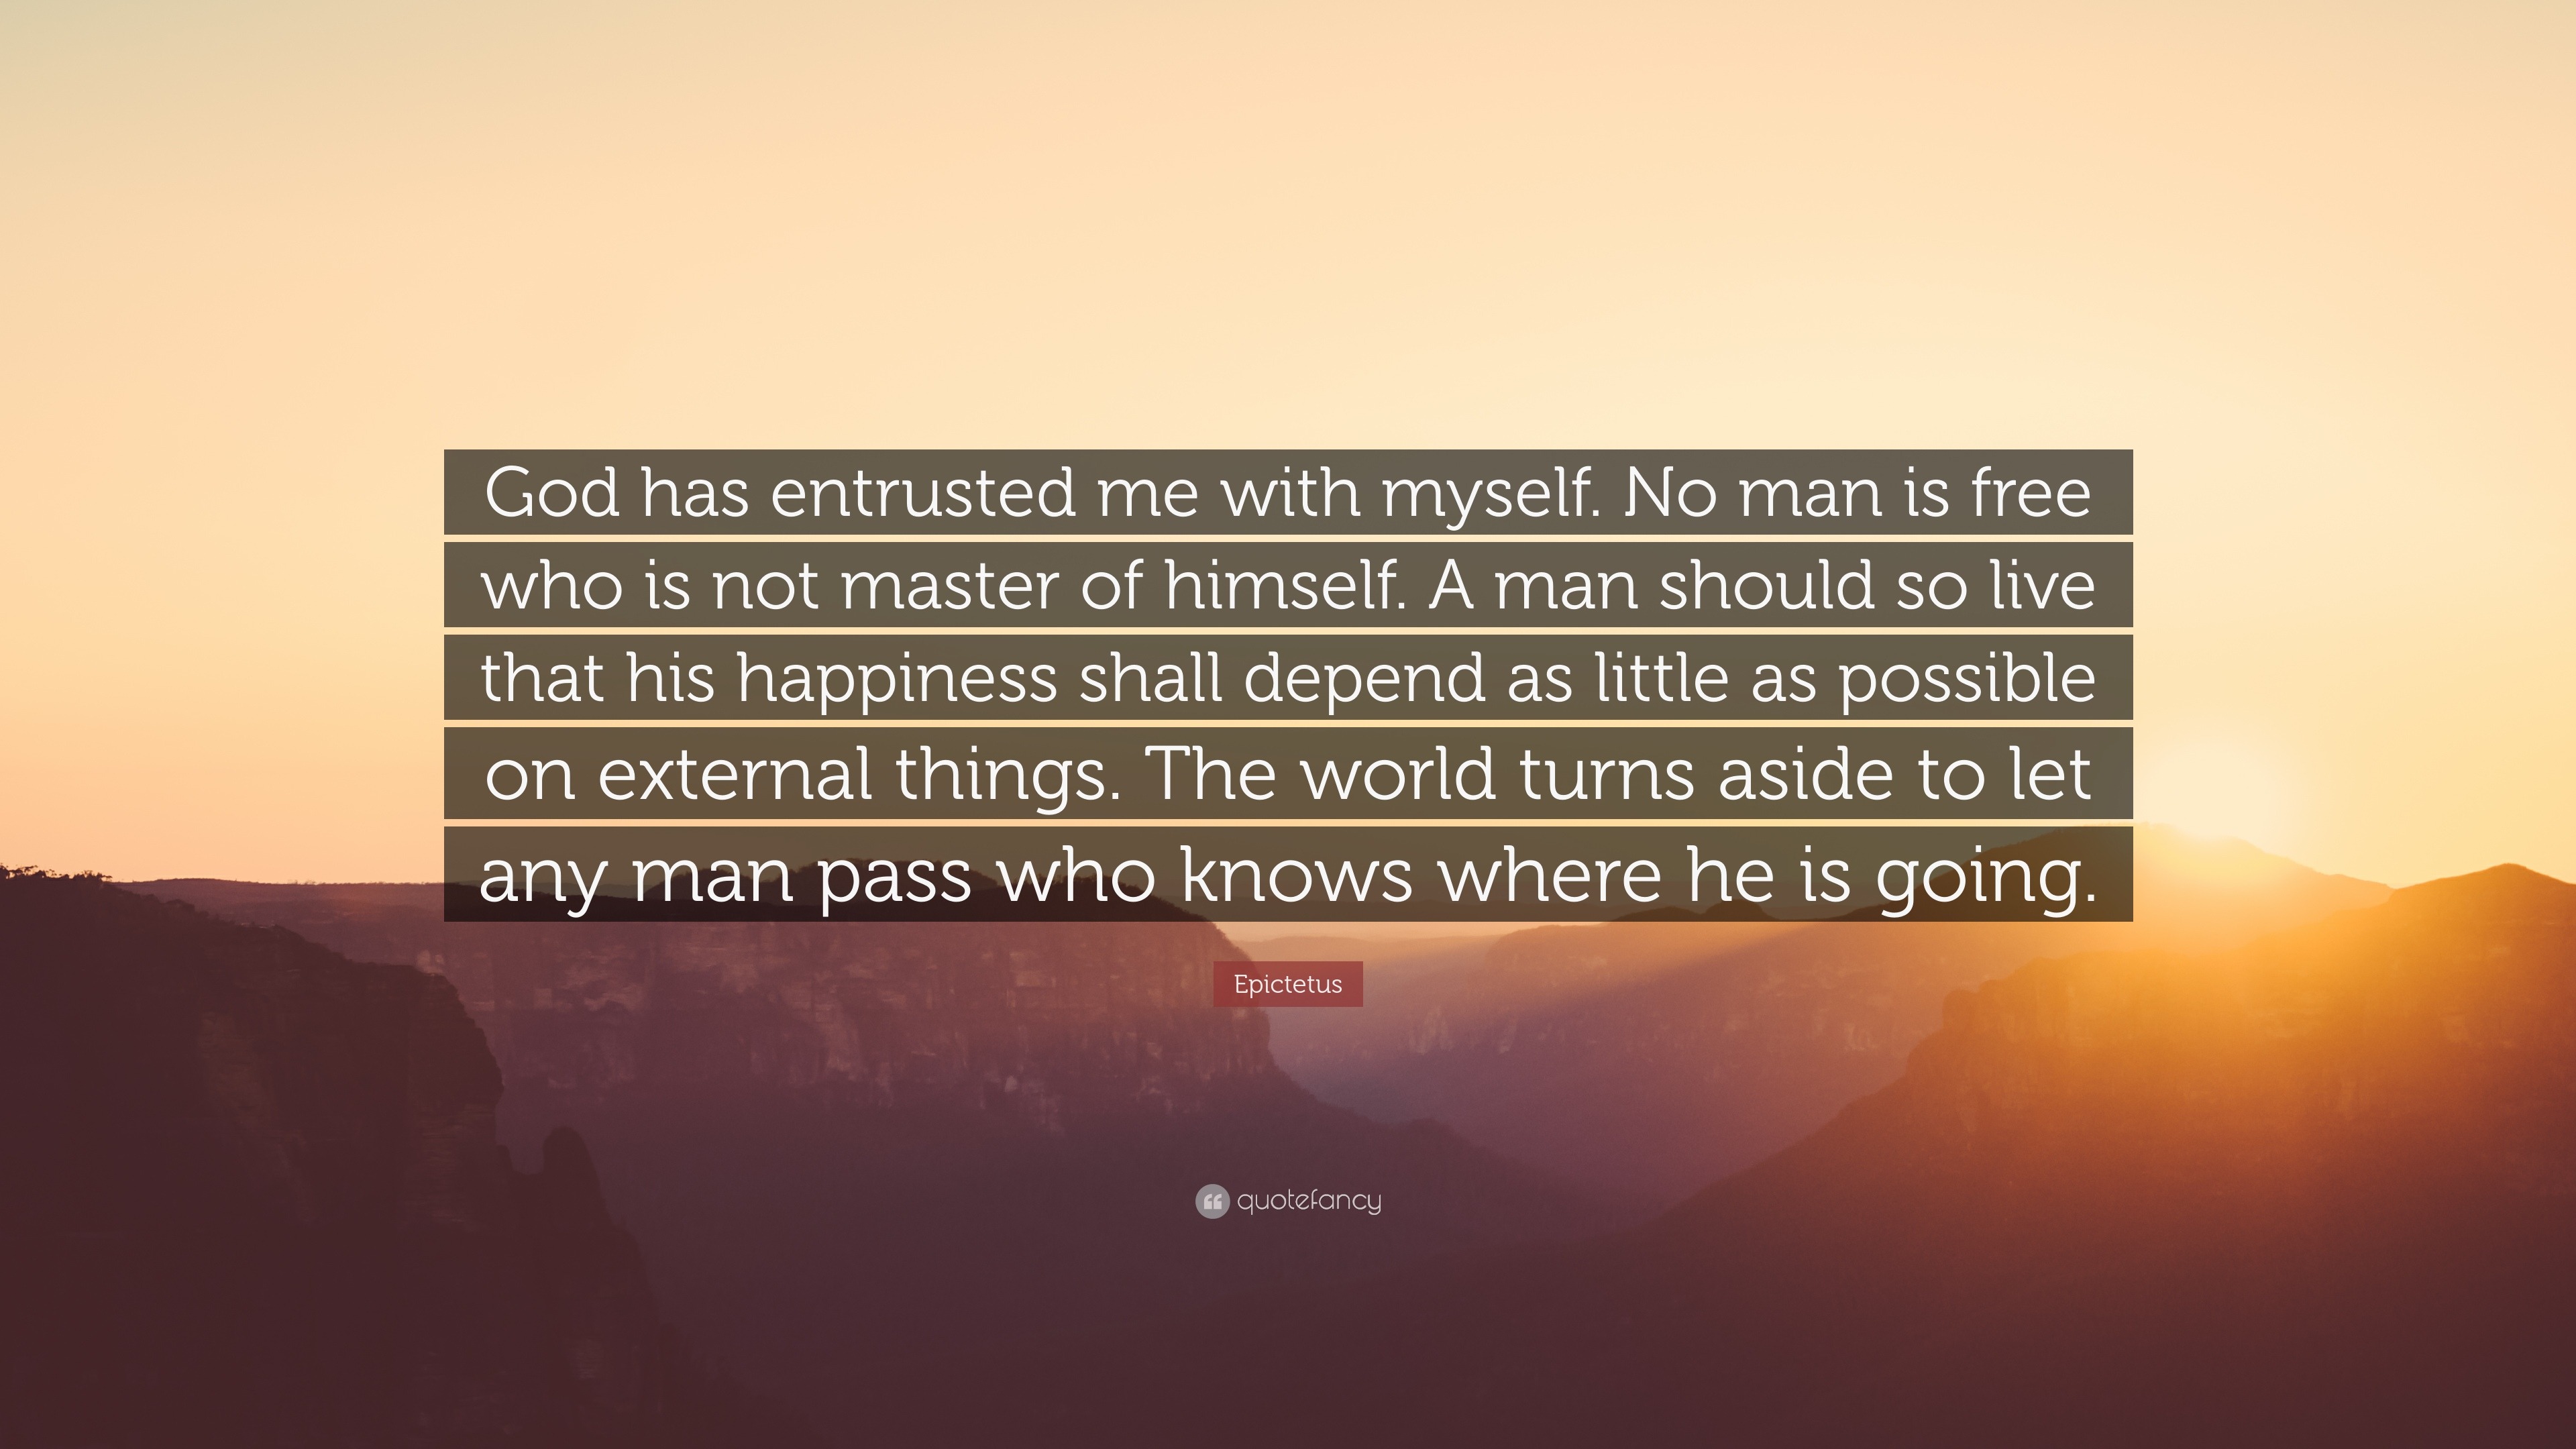 216778-Epictetus-Quote-God-has-entrusted-me-with-myself-No-man-is-free.jpg